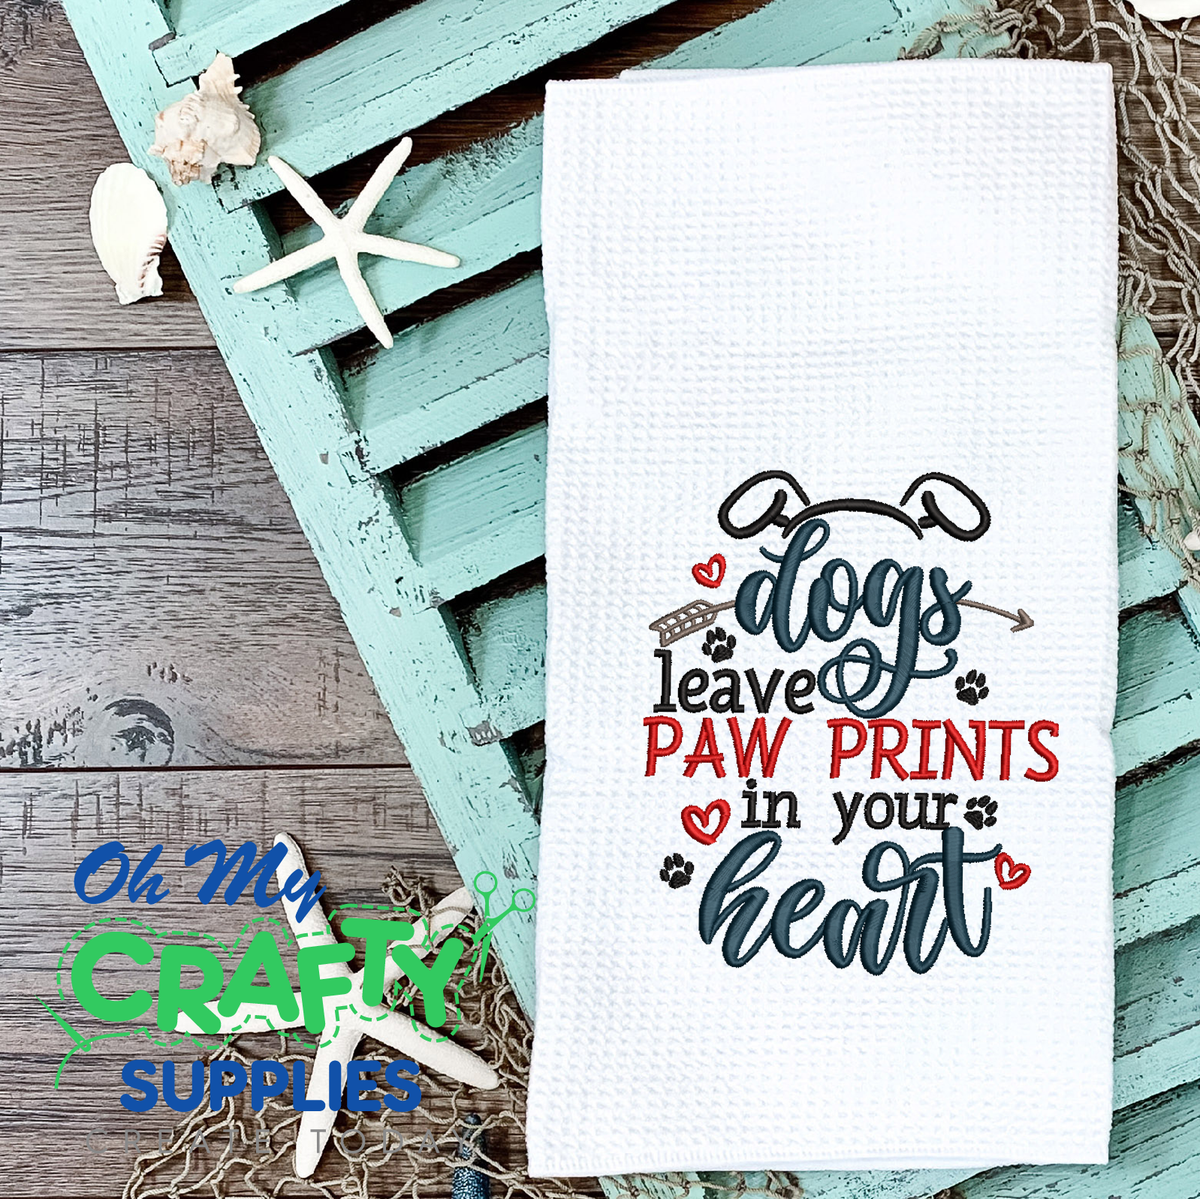 Paw Prints in Heart 2021 Embroidery Design - Oh My Crafty Supplies Inc.